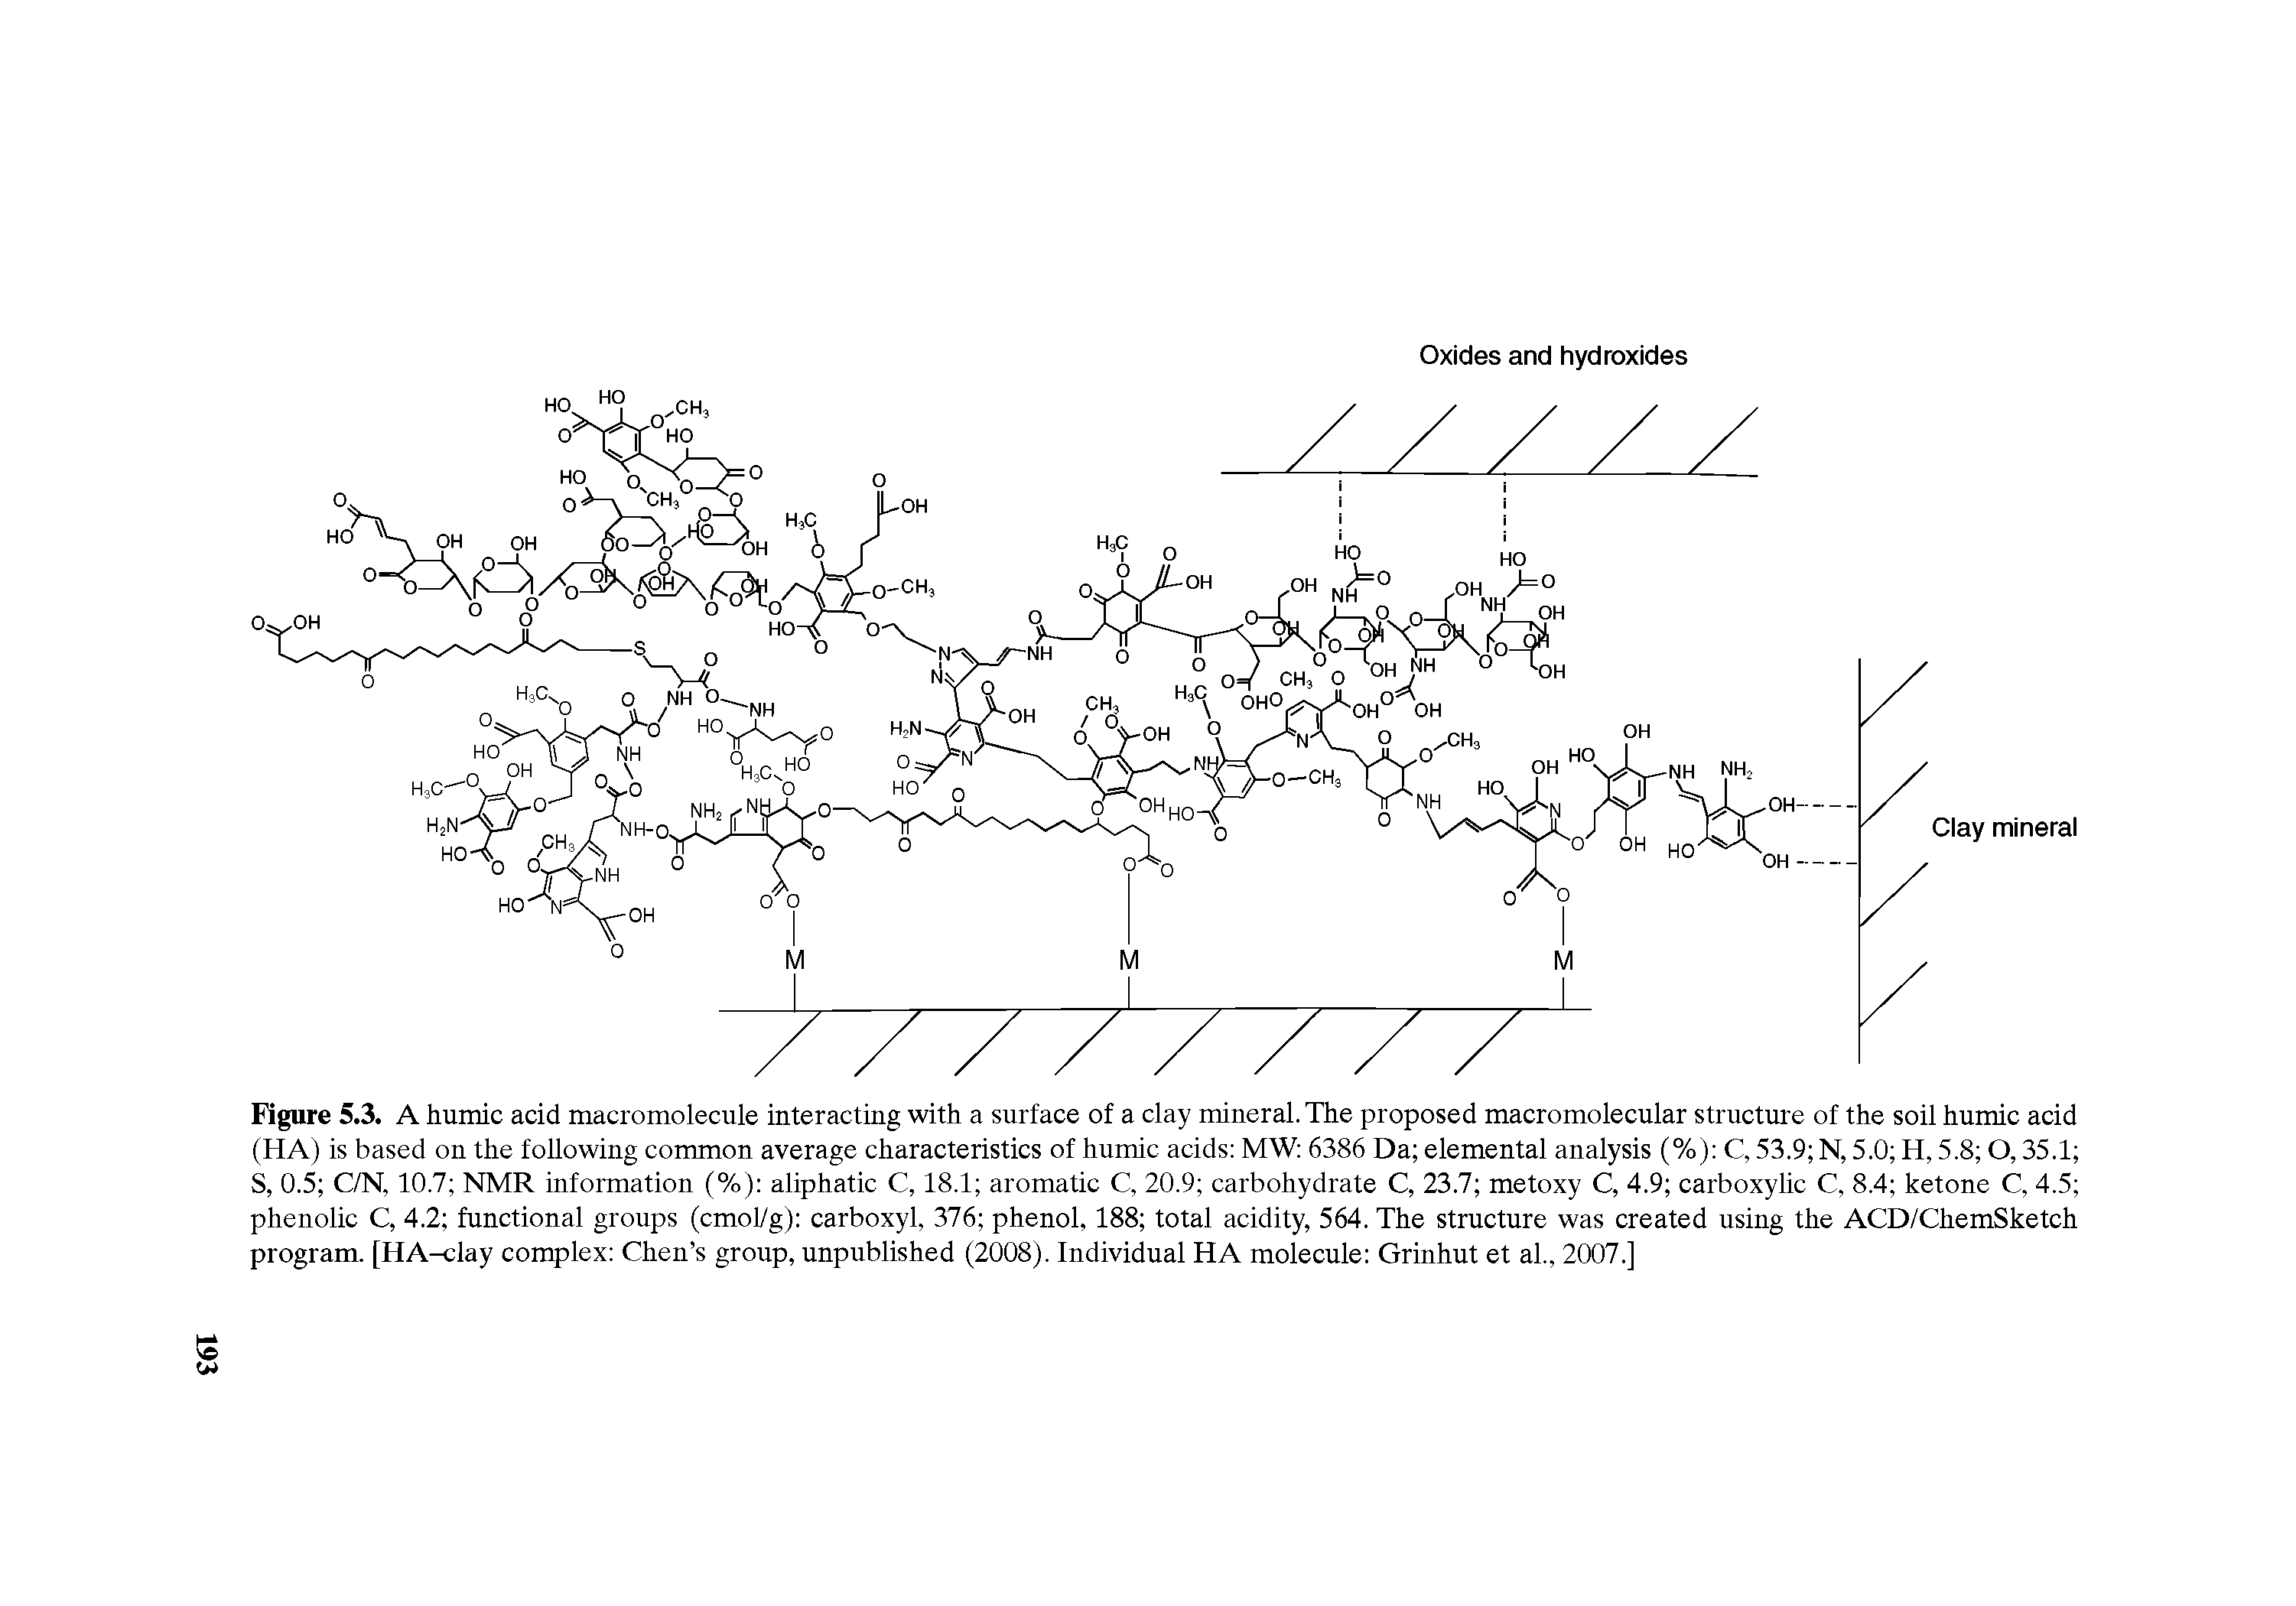 Figure 5.3. A humic acid macromolecule interacting with a surface of a clay mineral. The proposed macromolecular structure of the soil humic acid (HA) is based on the following common average characteristics of humic acids MW 6386 Da elemental analysis (%) C, 53.9 N, 5.0 H, 5.8 0,35.1 S, 0.5 C/N, 10.7 NMR information (%) aliphatic C, 18.1 aromatic C, 20.9 carbohydrate C, 23.7 metoxy C, 4.9 carboxylic C, 8.4 ketone C, 4.5 phenolic C, 4.2 functional groups (cmol/g) carboxyl, 376 phenol, 188 total acidity, 564. The structure was created using the ACD/ChemSketch program. [HA-clay complex Chen s group, unpublished (2008). Individual HA molecule Grinhut et al., 2007.]...